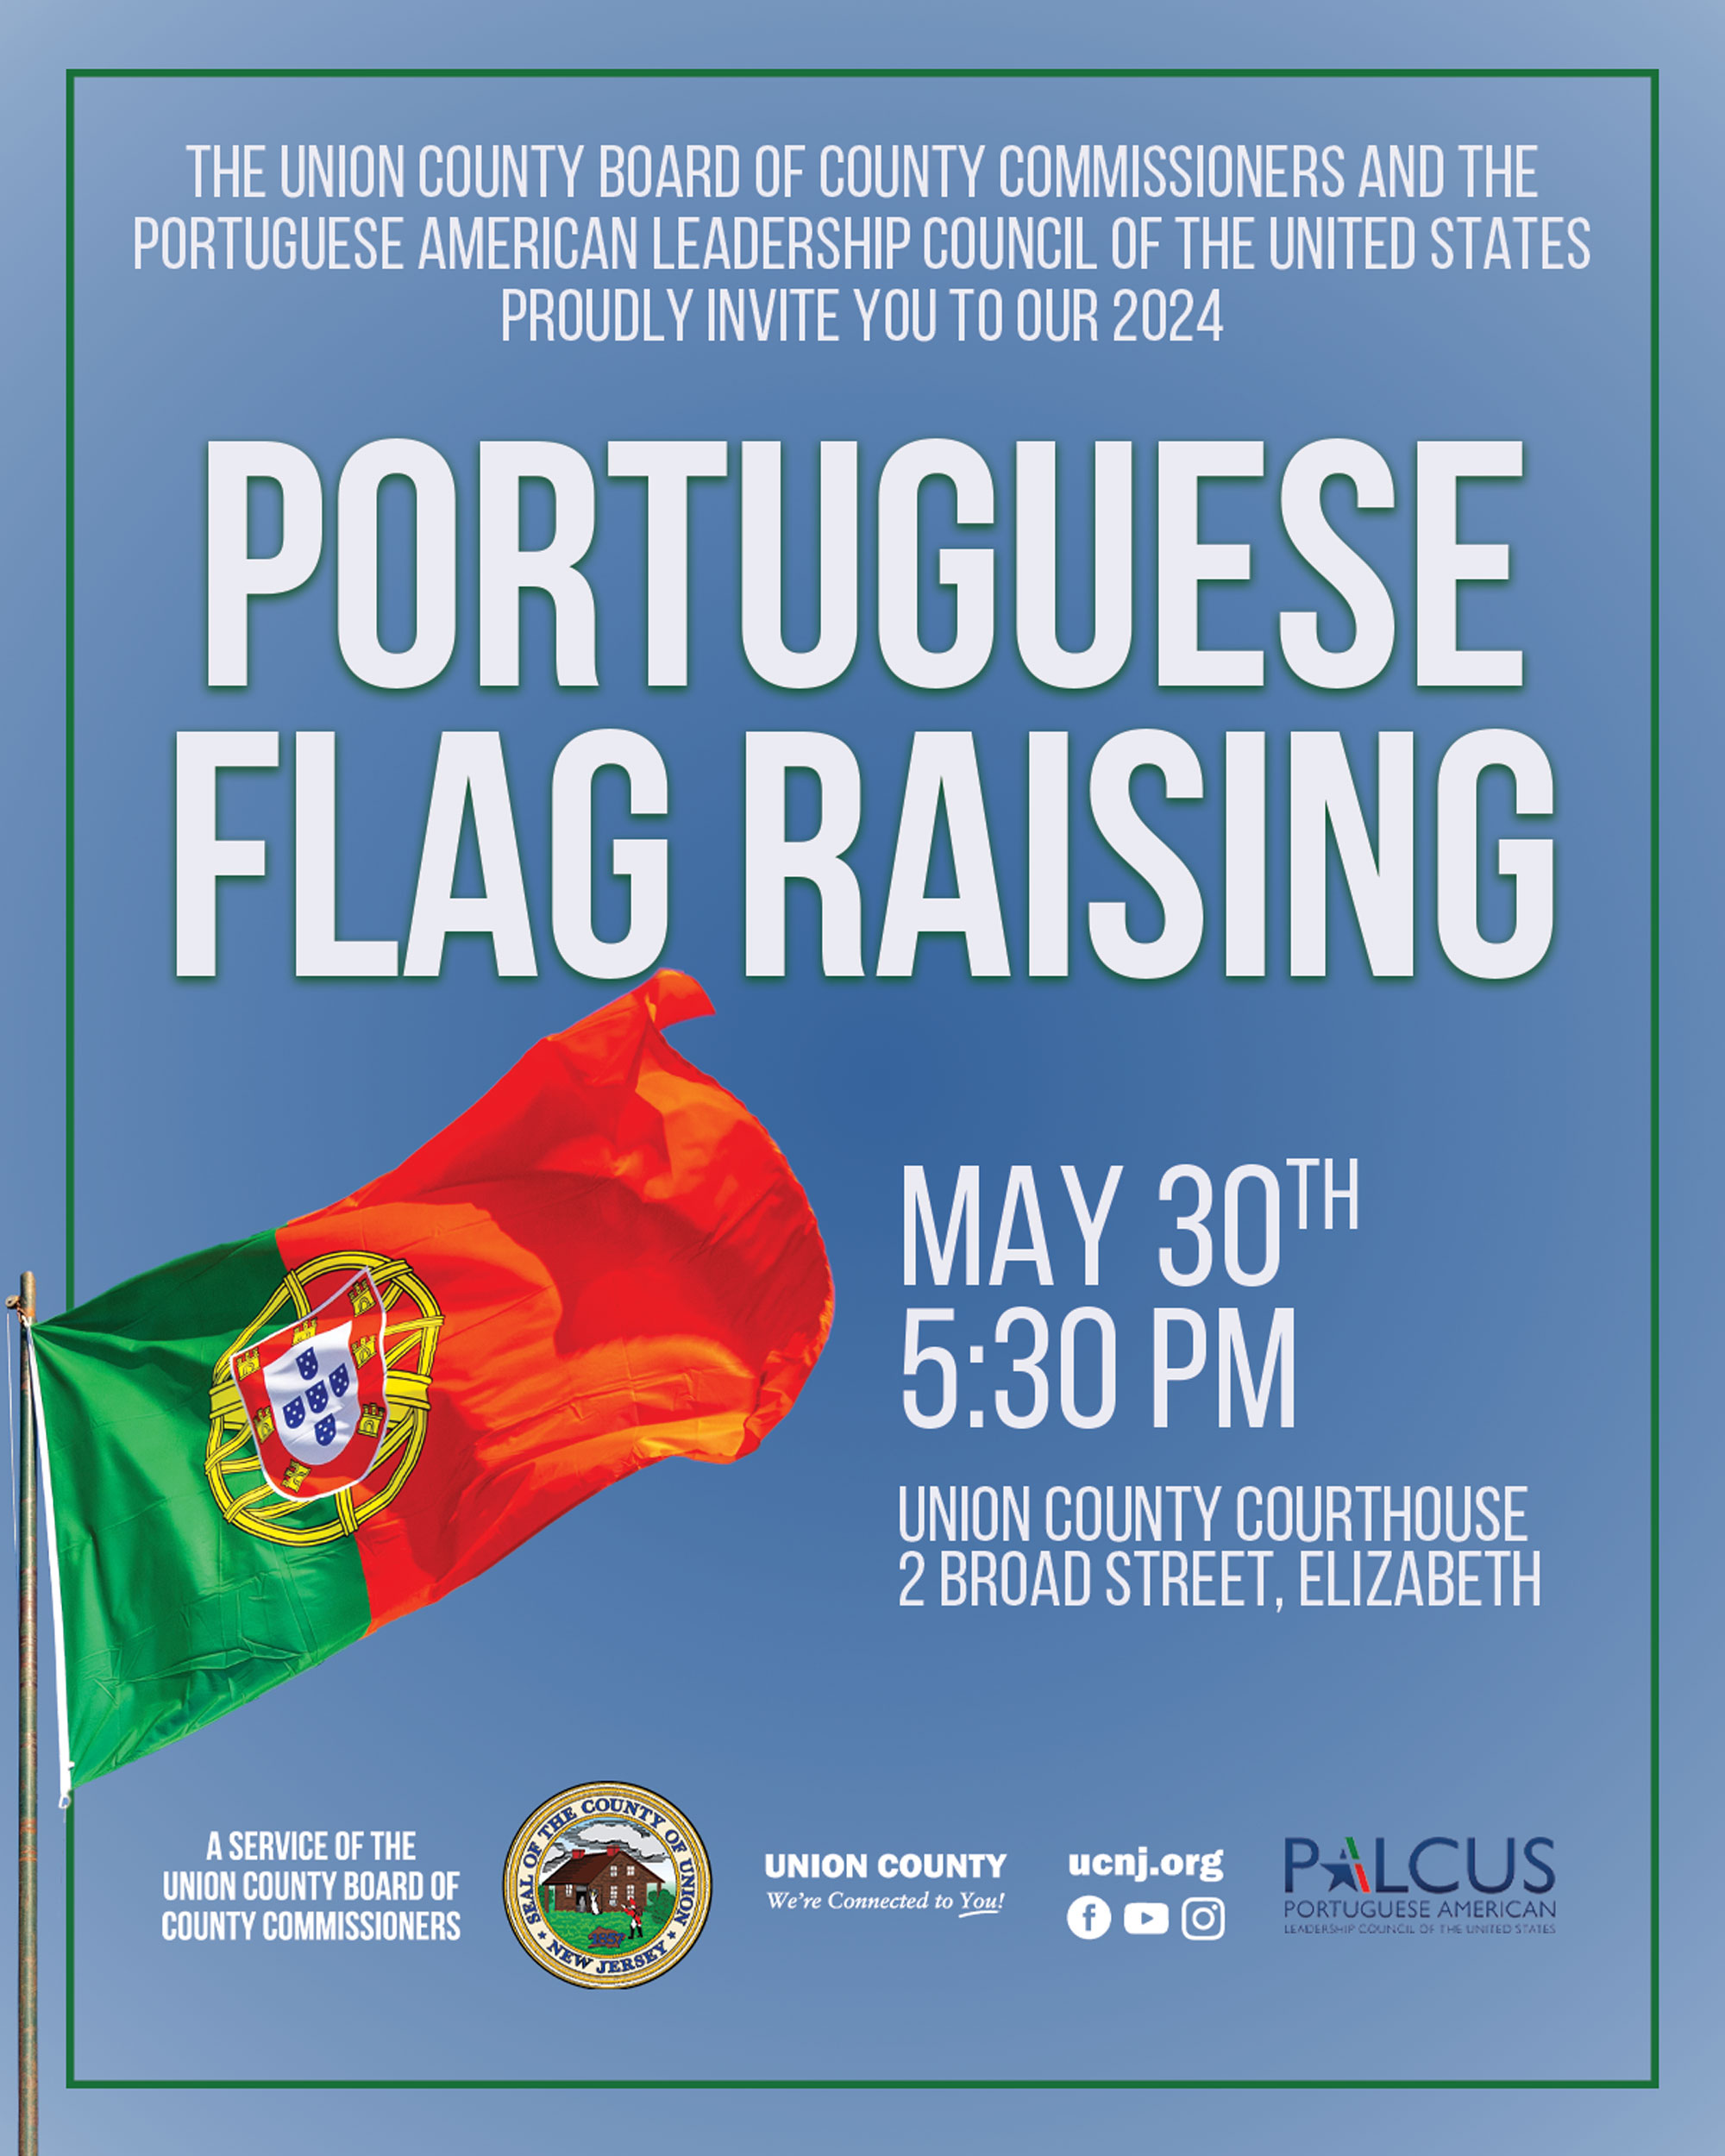 Union County to Hold Annual Portuguese Flag Raising on May 30th